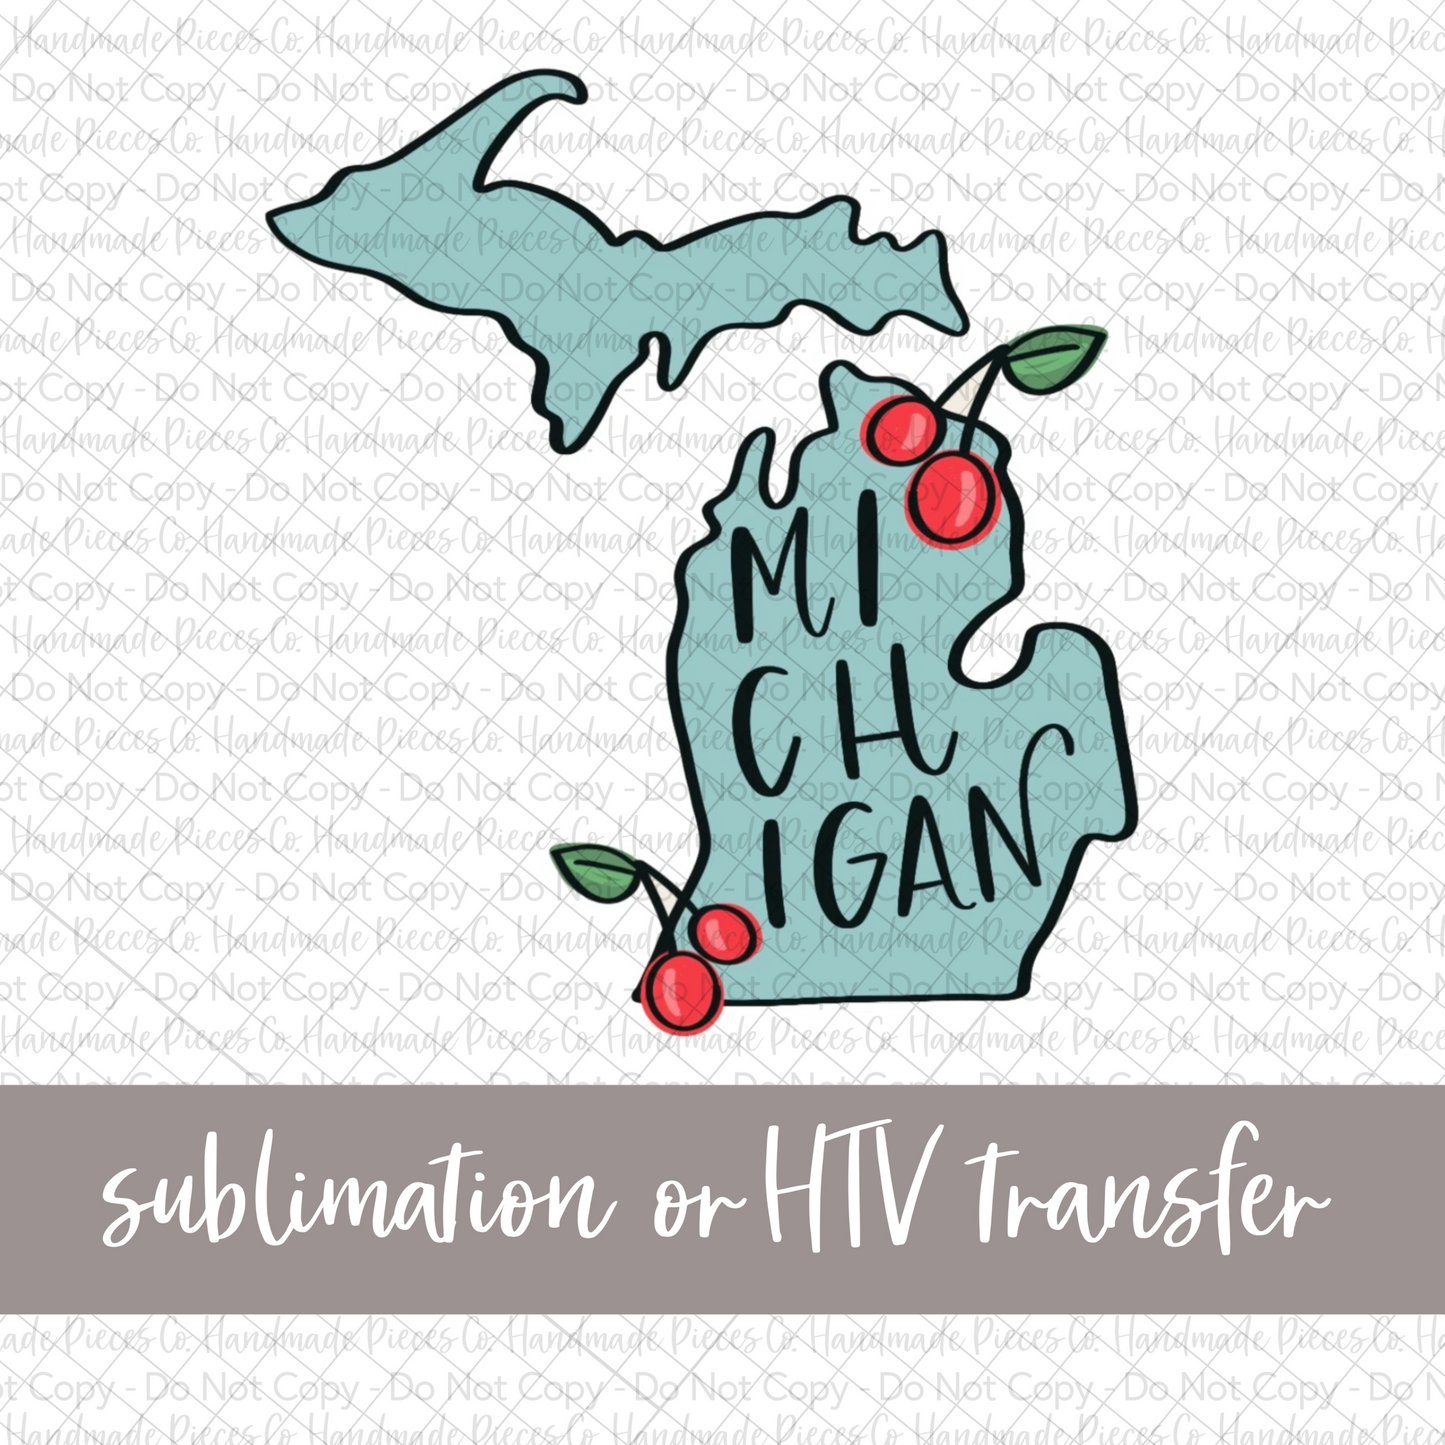 Michigan - Sublimation or HTV Transfer